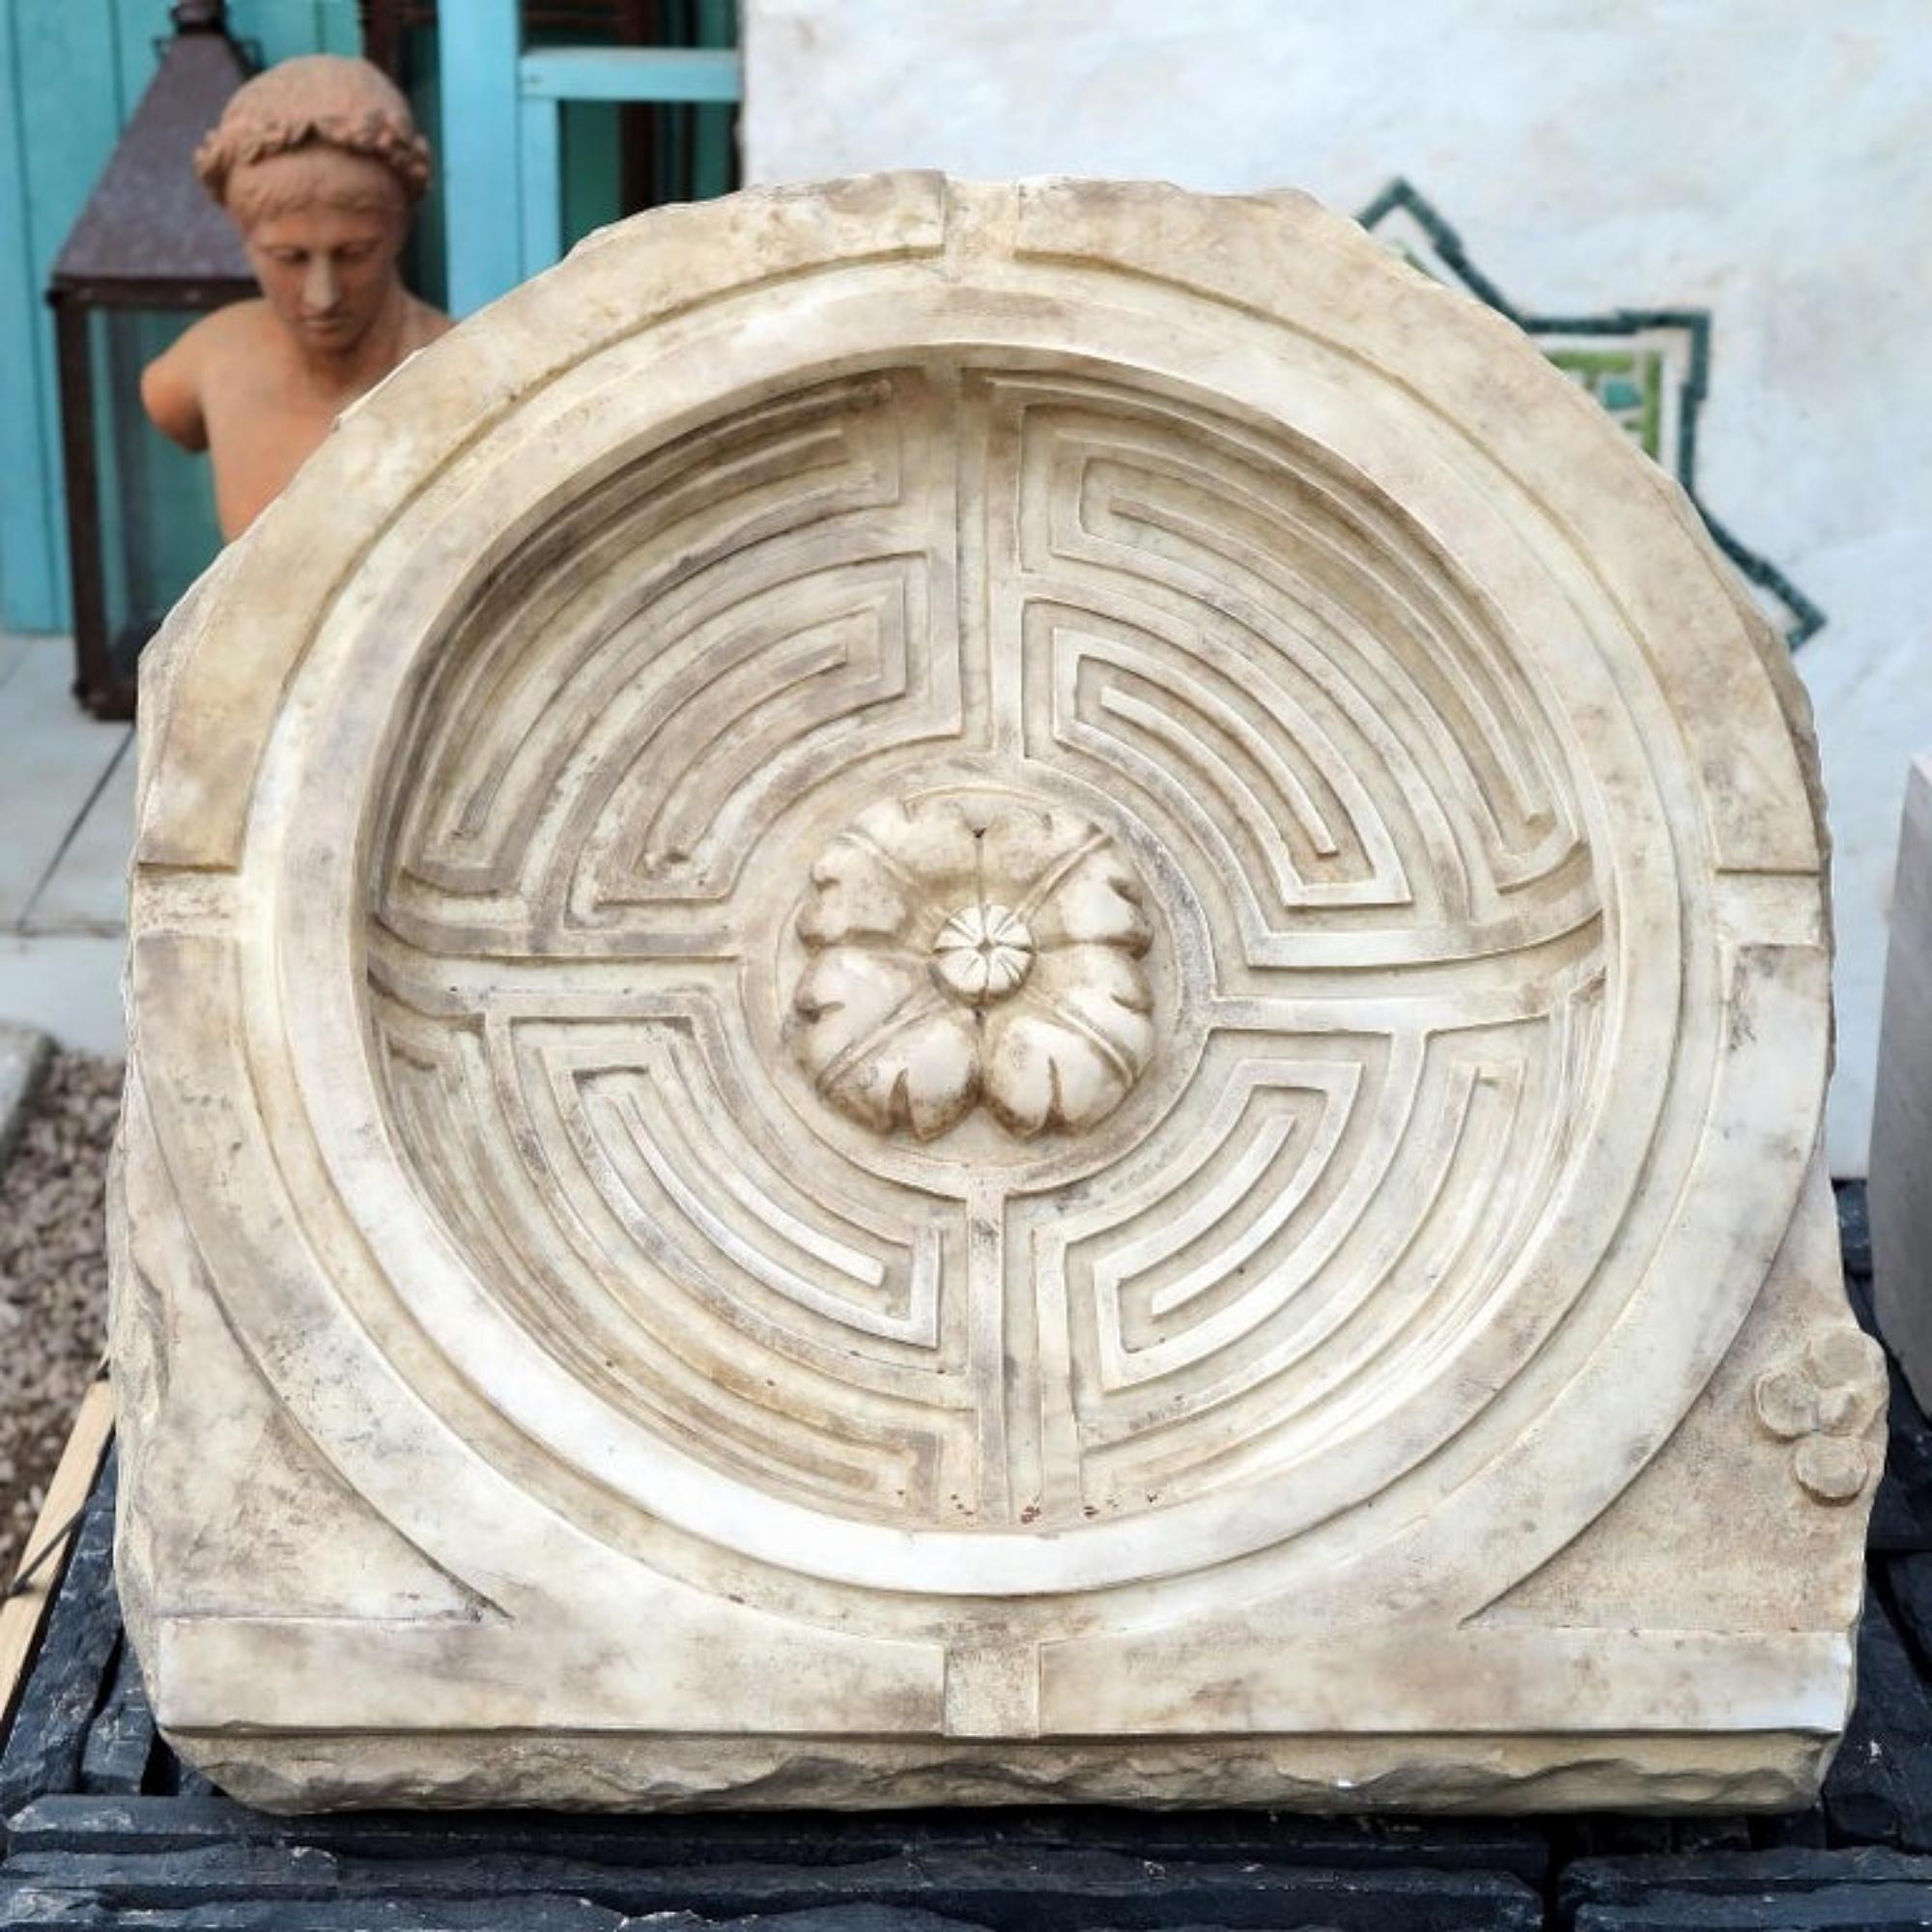 LABYRINTH
DI SIDE (ANATOLIA) WHITE CARRARA MARBLE late 19th Century
Italy
Made of white Carrara marble.
WIDTH 70 cm
LENGTH 70 cm
THICKNESS 10 cm
WEIGHT 147 Kg
DIAMETER OF THE LABITINTO 57 cm
good original condition